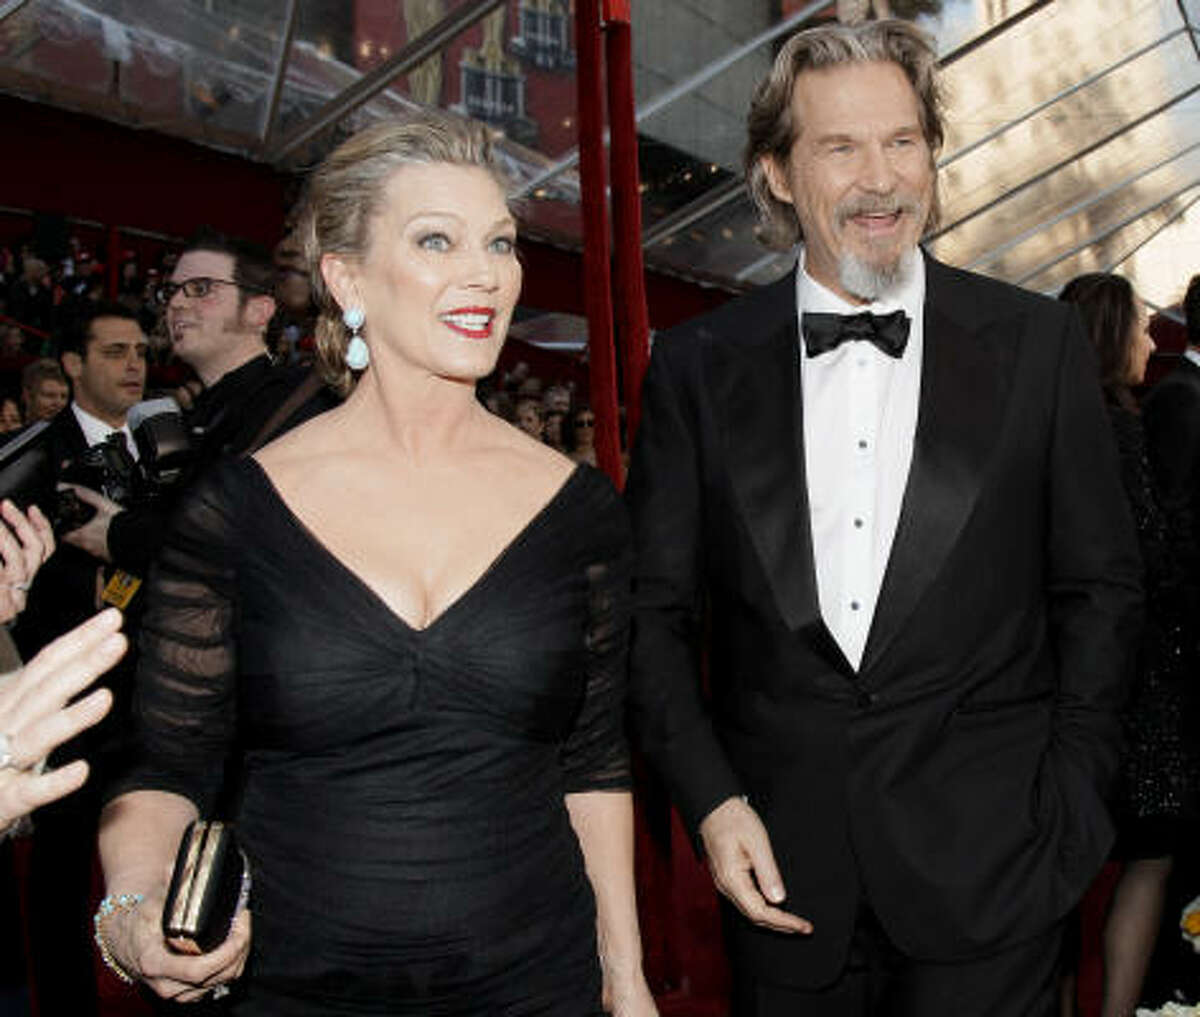 Jeff Bridges, usually hands-down handsome, looks vaguely Colonel Sanders with his Confederate beard. Nice Gucci tux, though.